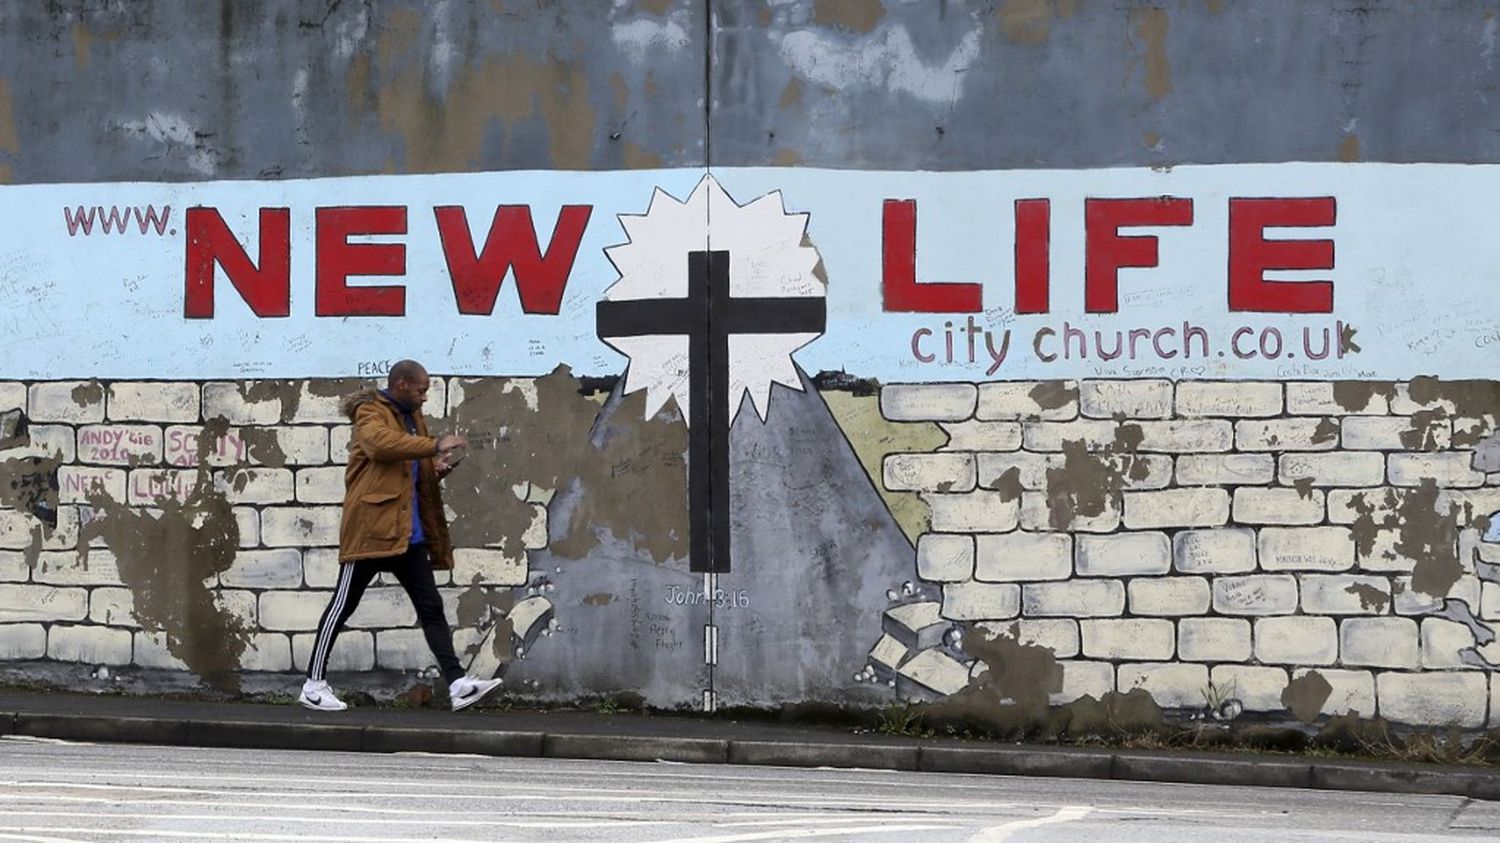 In Northern Ireland, Catholics now outnumber Protestants
